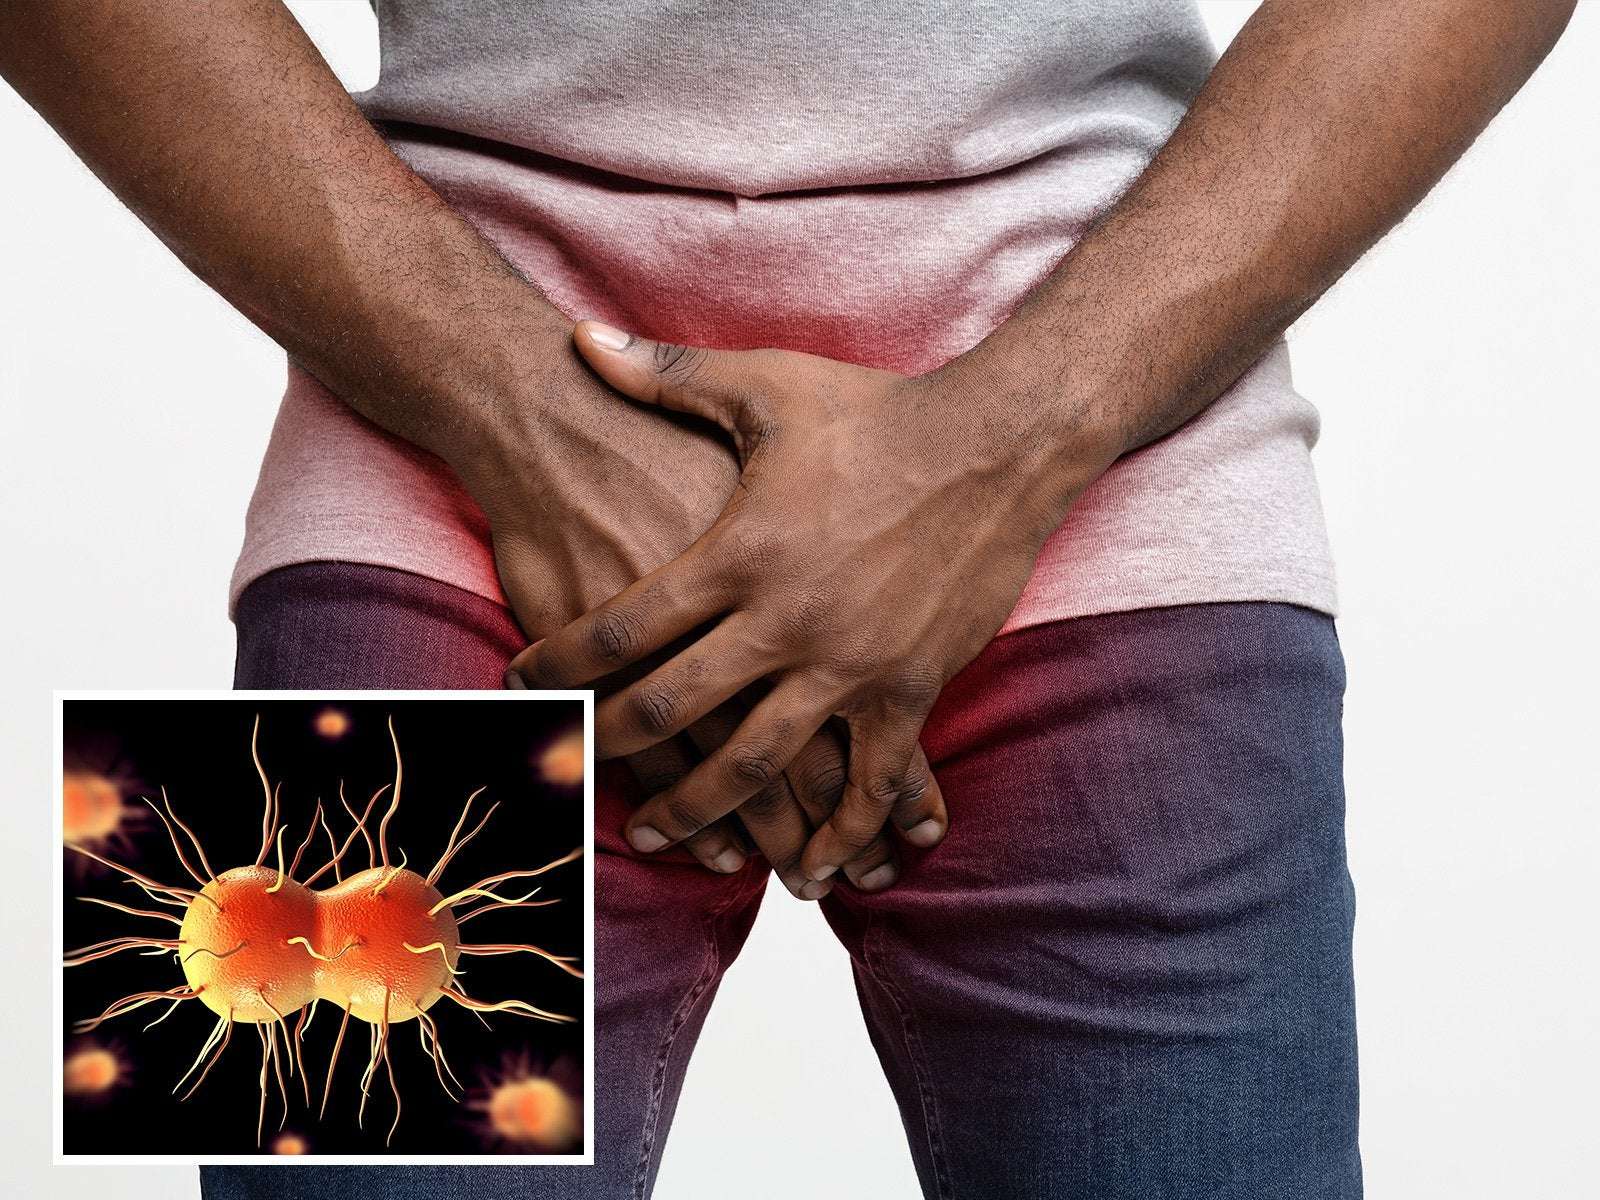 image for Man Gets Extreme, Super-Gonorrhea after Unprotected Sex with Prostitute